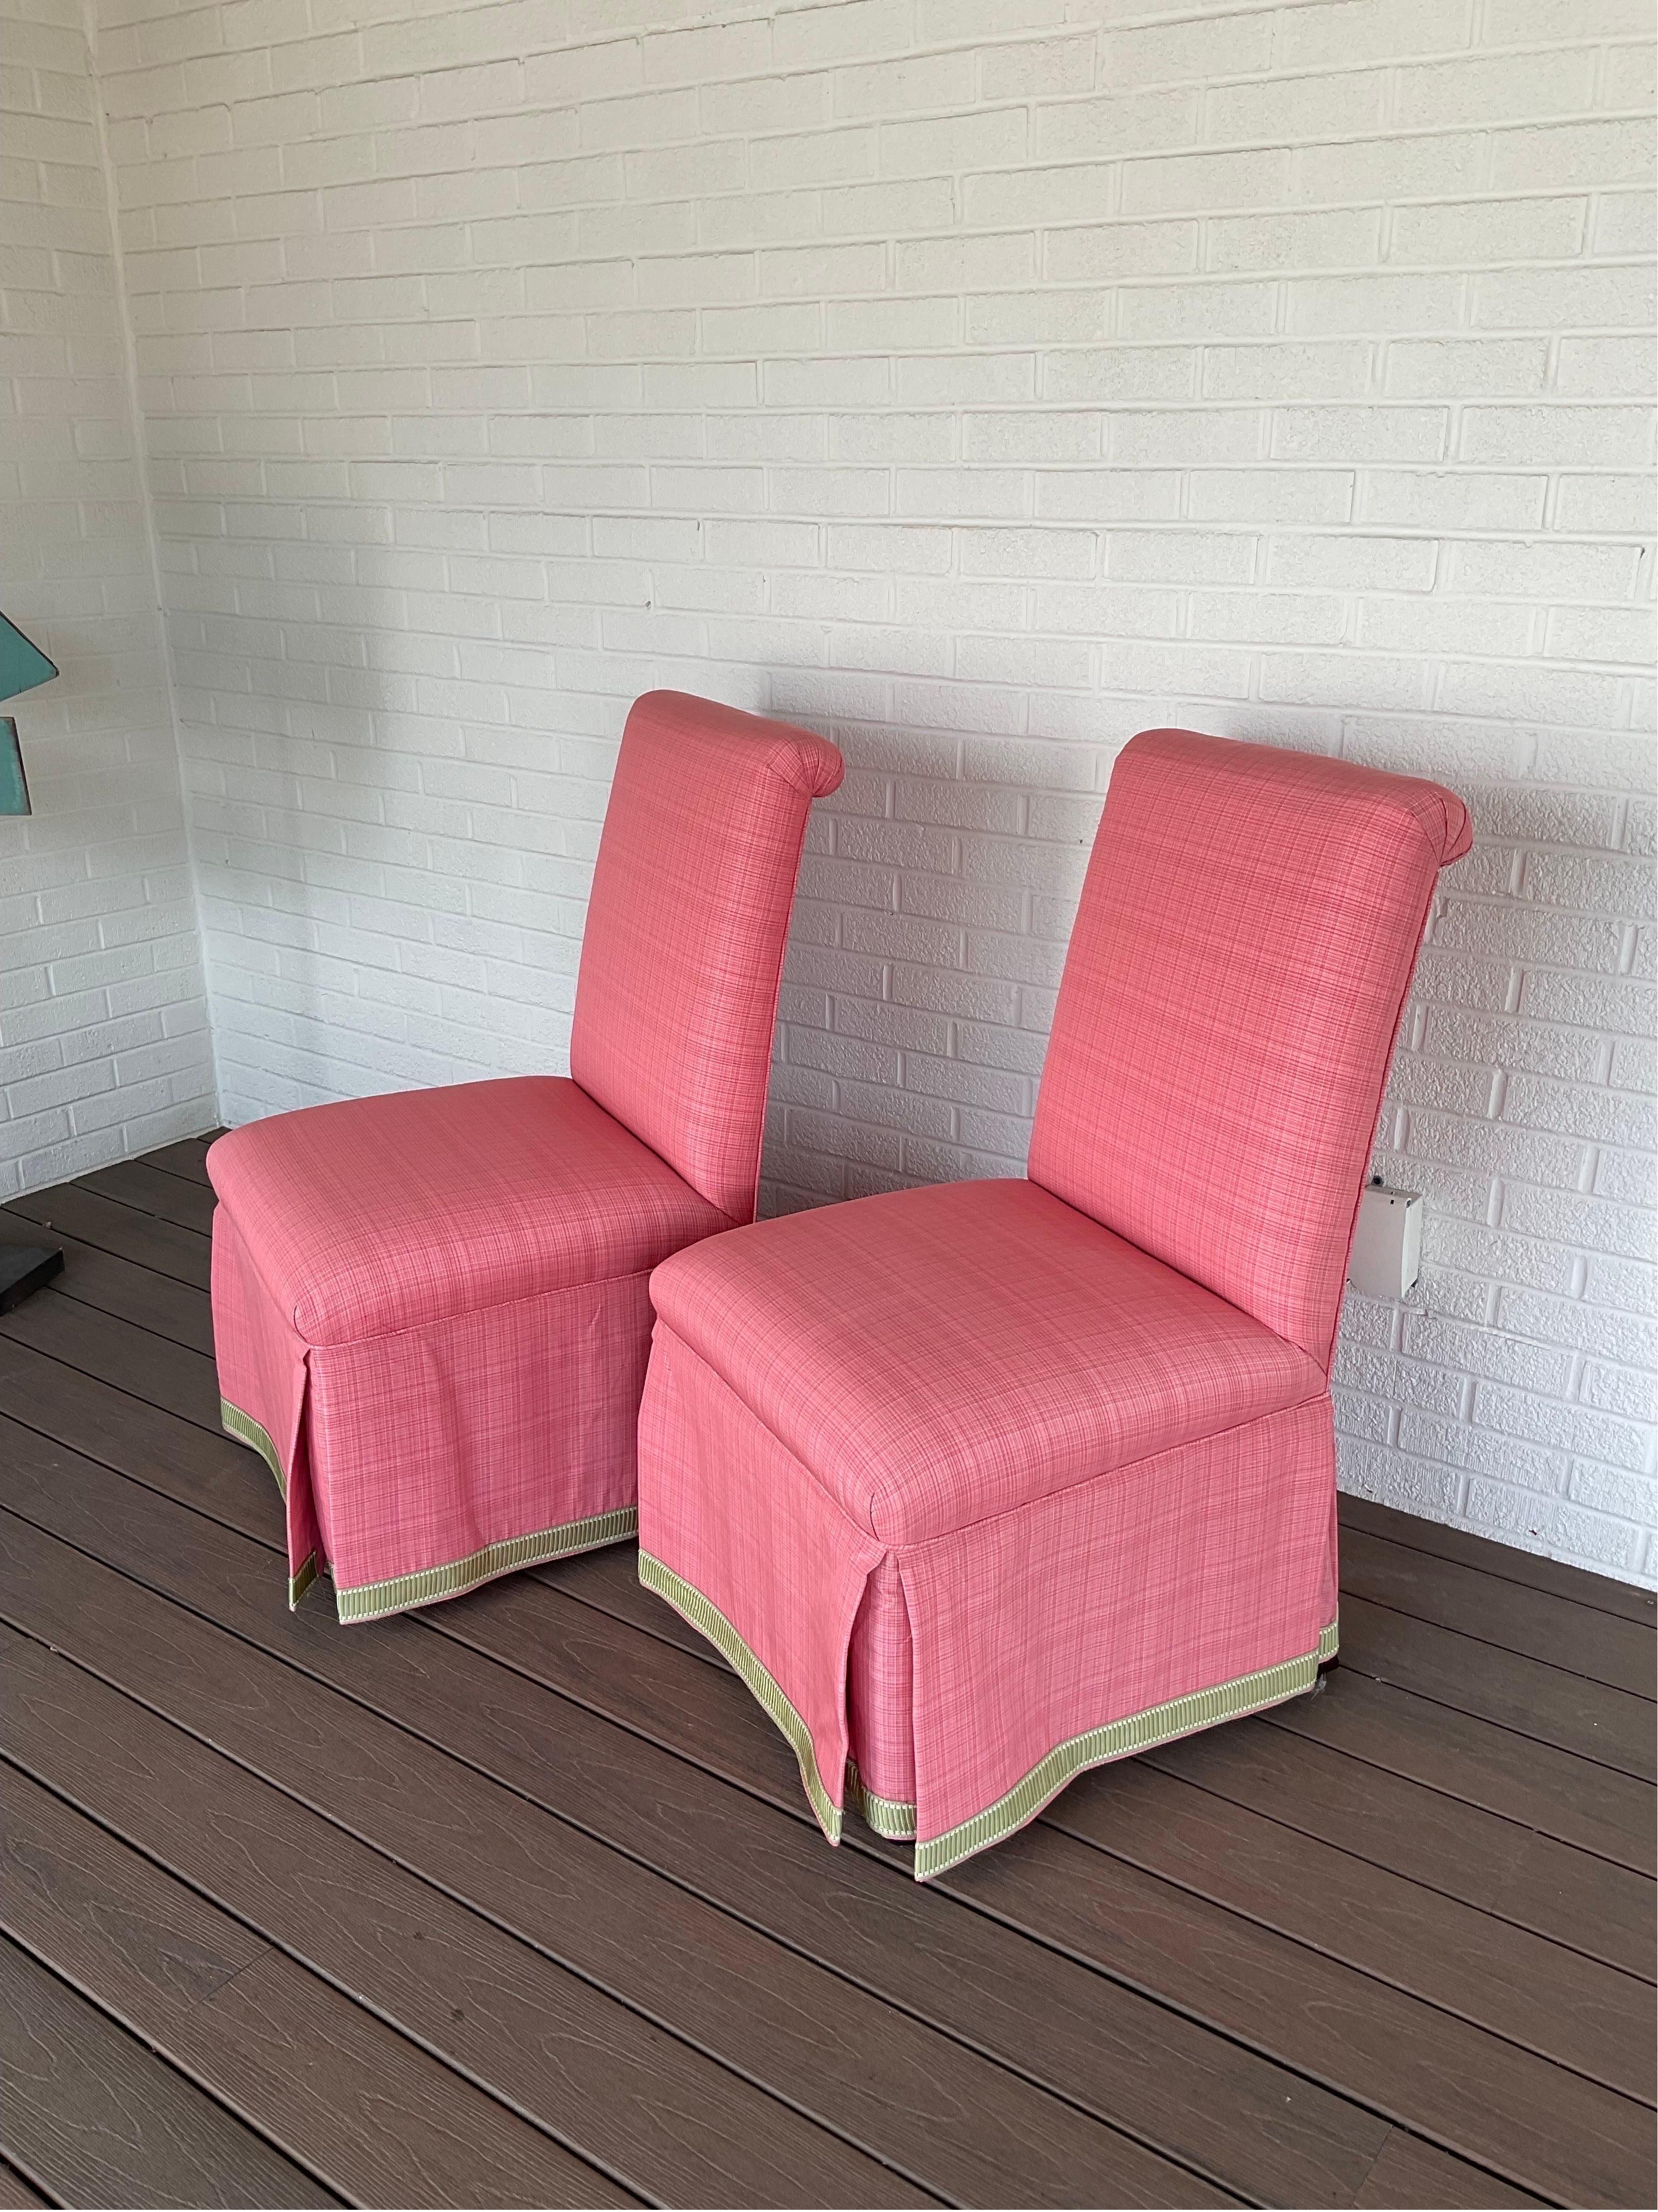 Lee Jofa Custom Parsons Chairs, a Pair In Excellent Condition For Sale In Hartville, OH